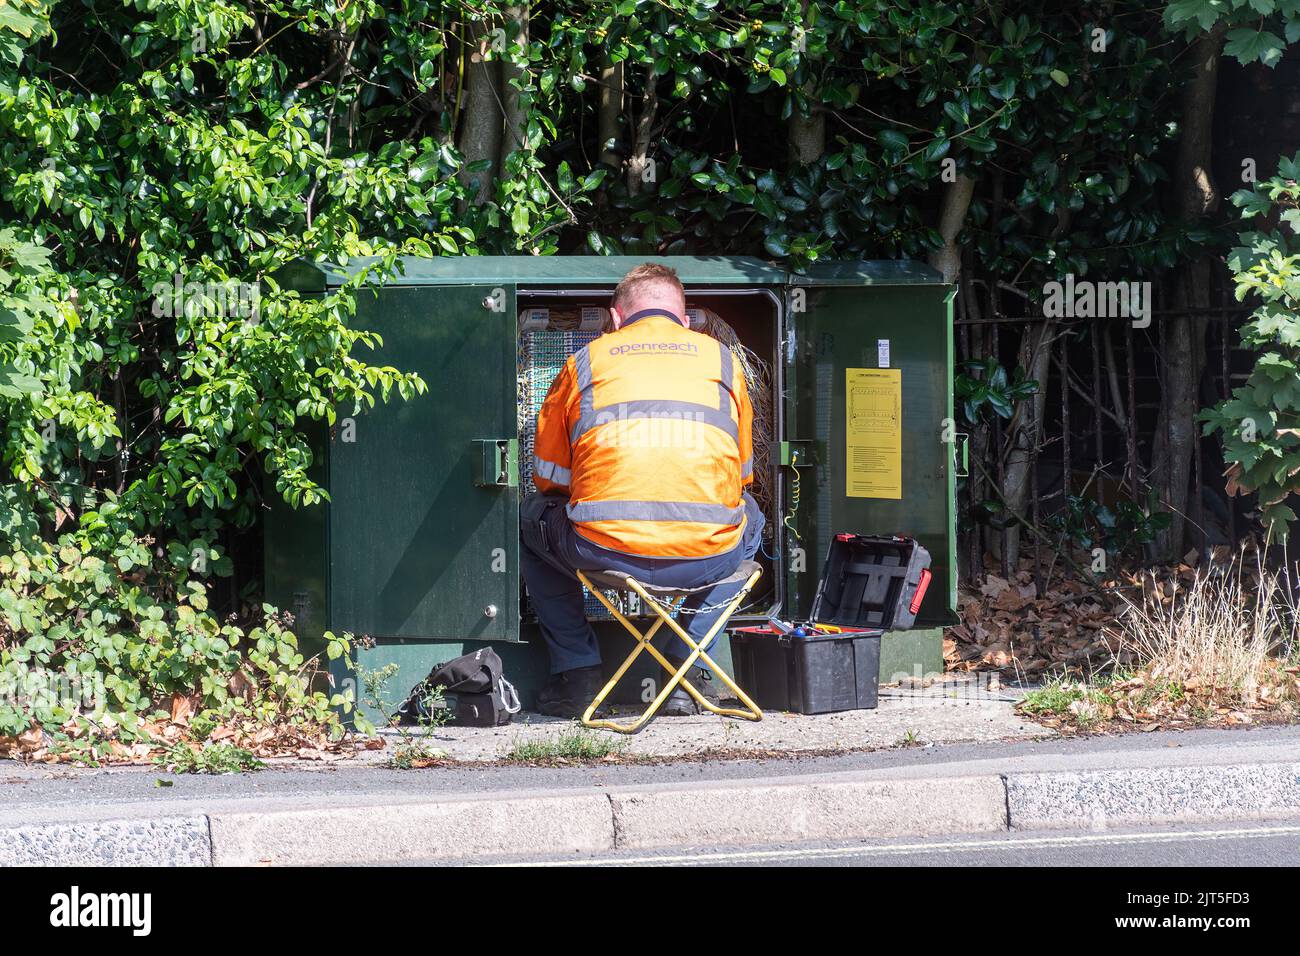 Openreach engineer working in a green box with communications cables, maintaining telephone and broadband network, UK Stock Photo